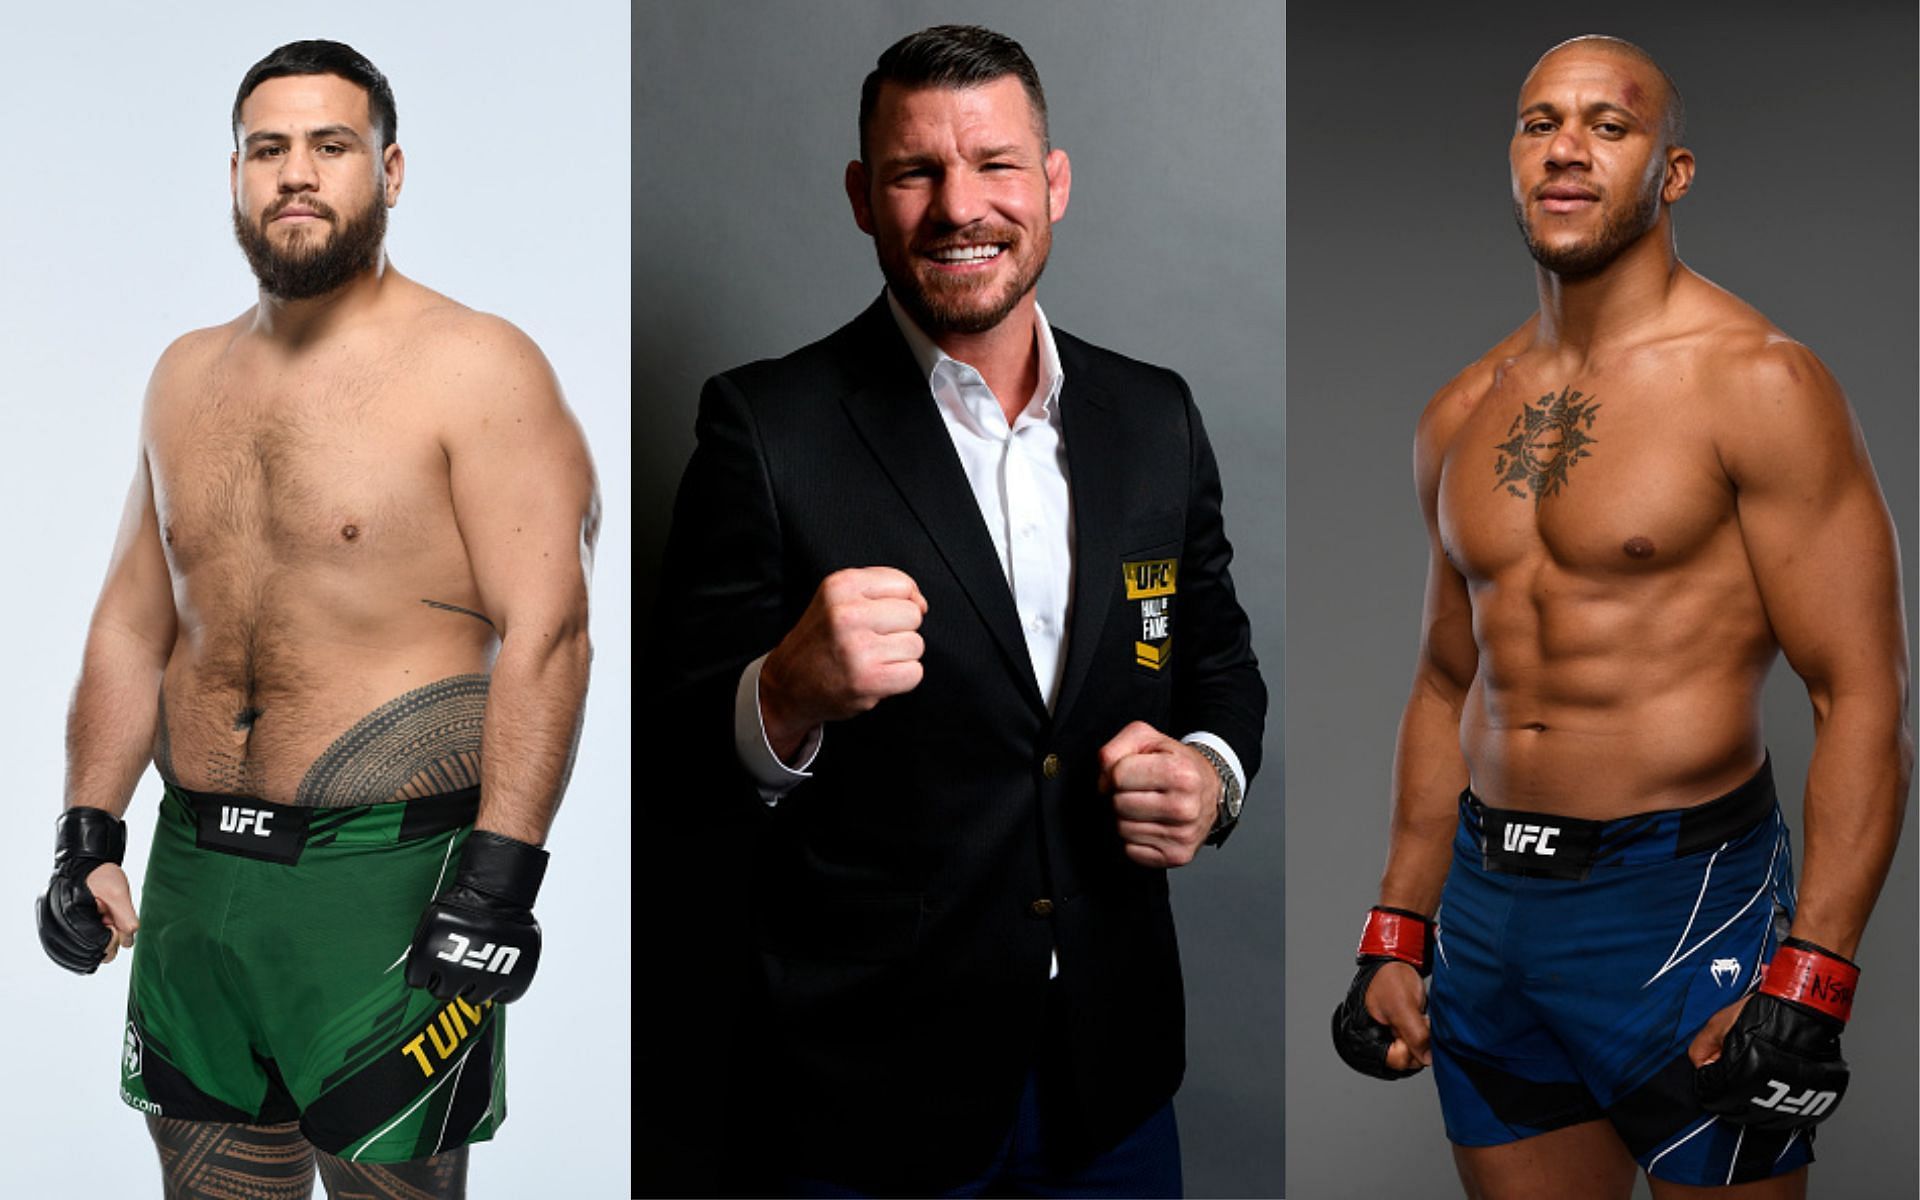 Tai Tuivasa (left), Michael Bisping (middle), and Ciryl Gane (right)(Images via Getty)